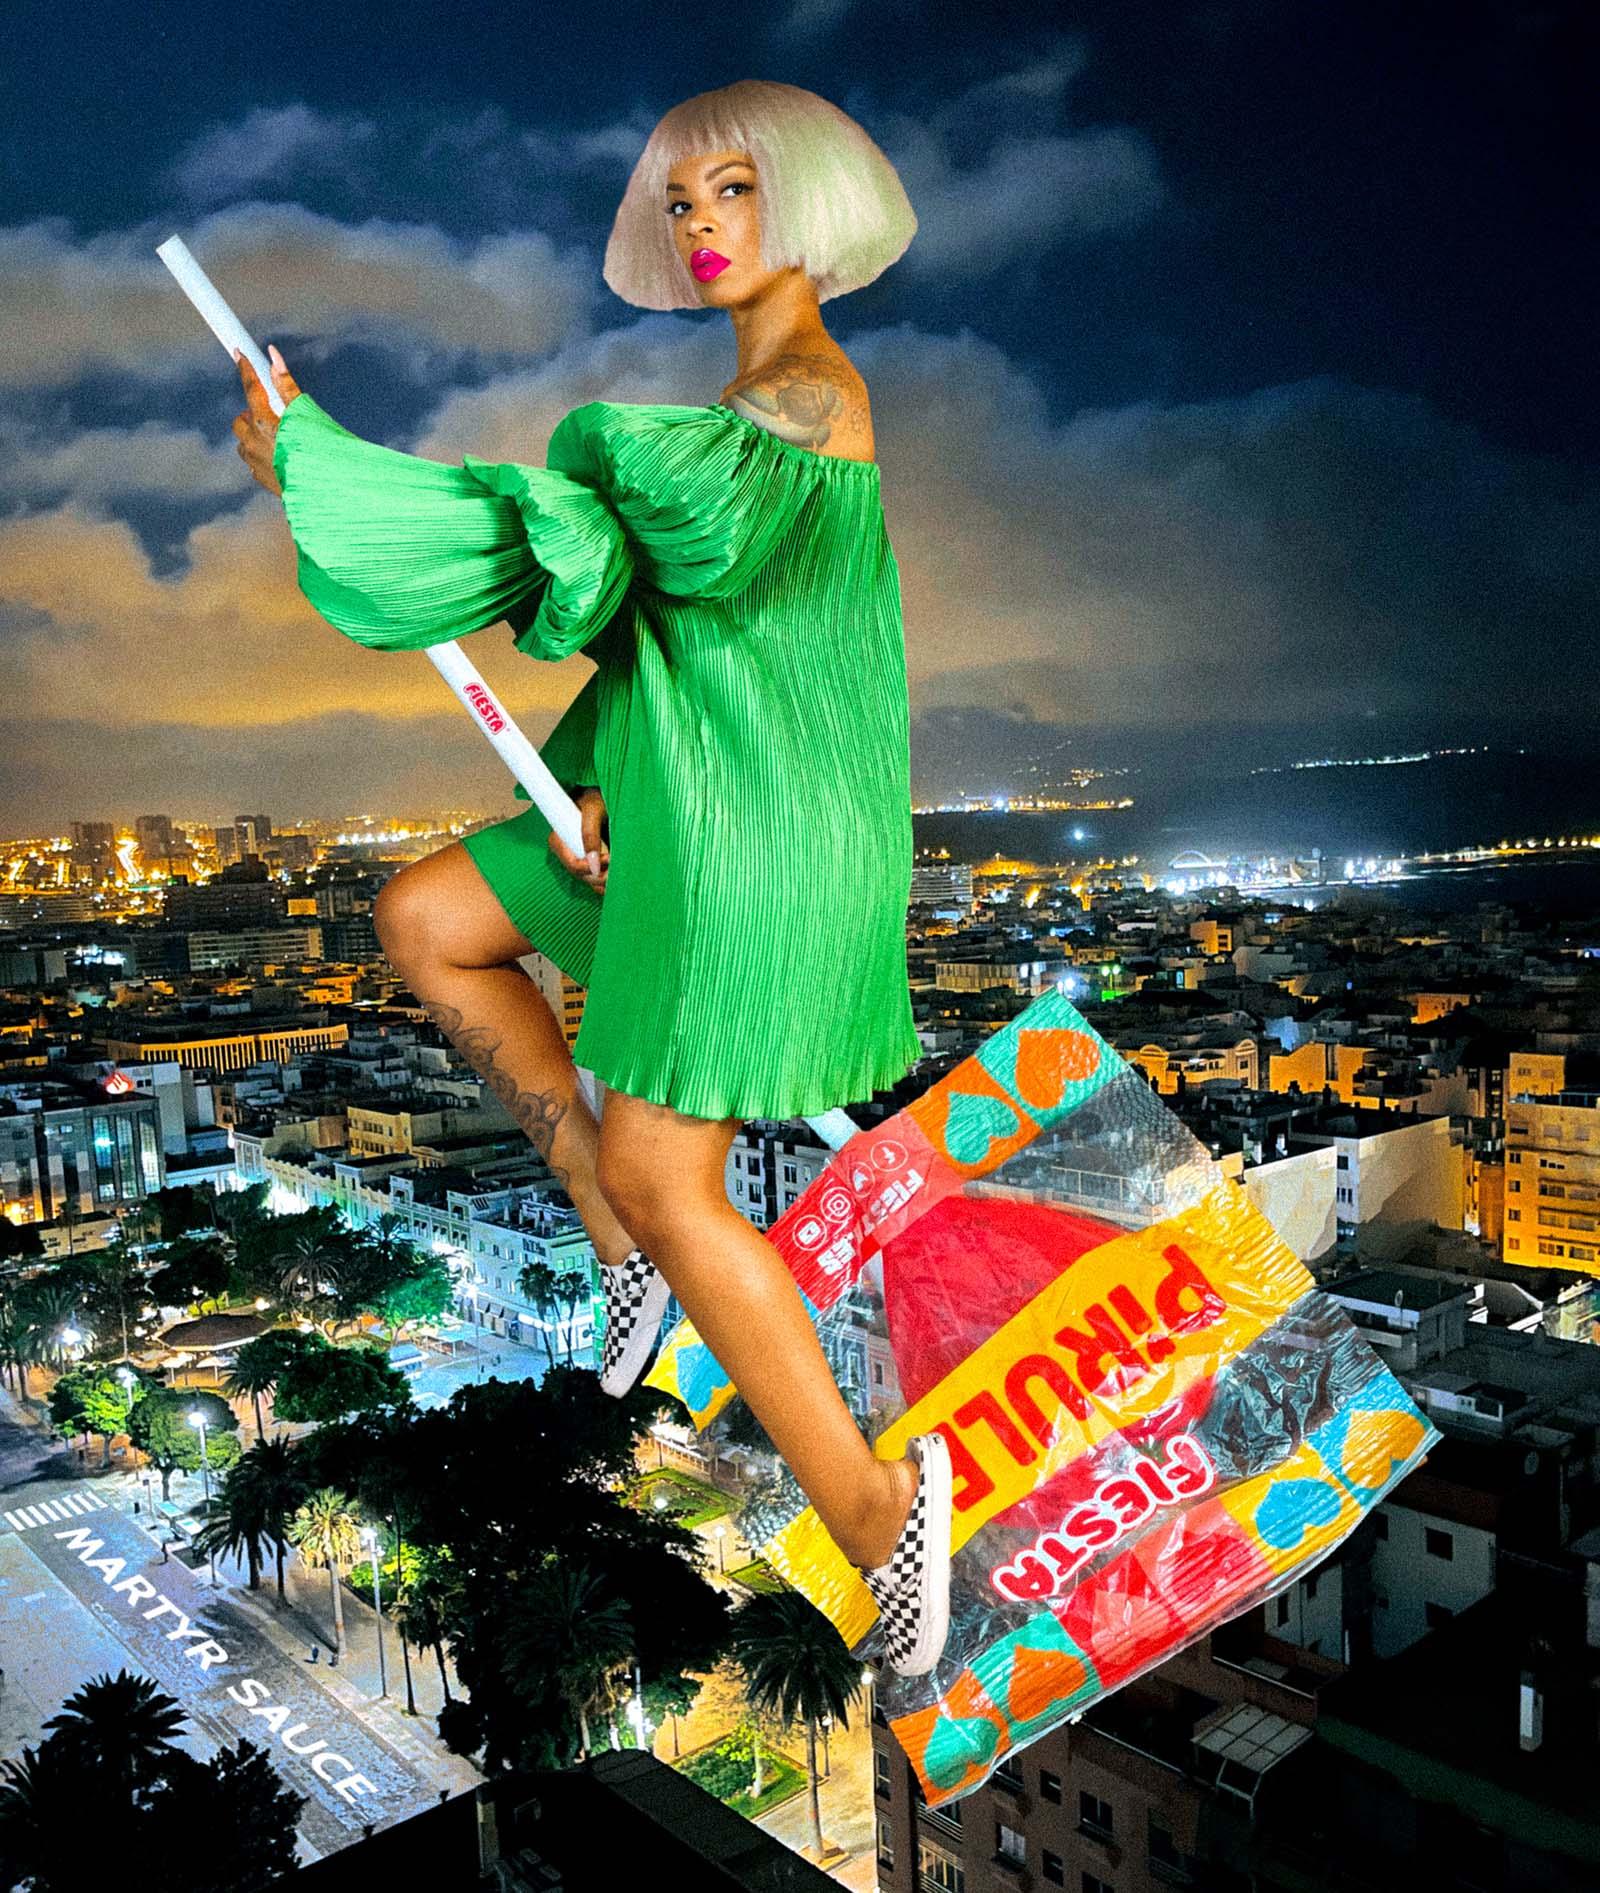 person in a blonde bob hairdo and bright green baby doll dress rides a lollipop like a broom over a neon landscape